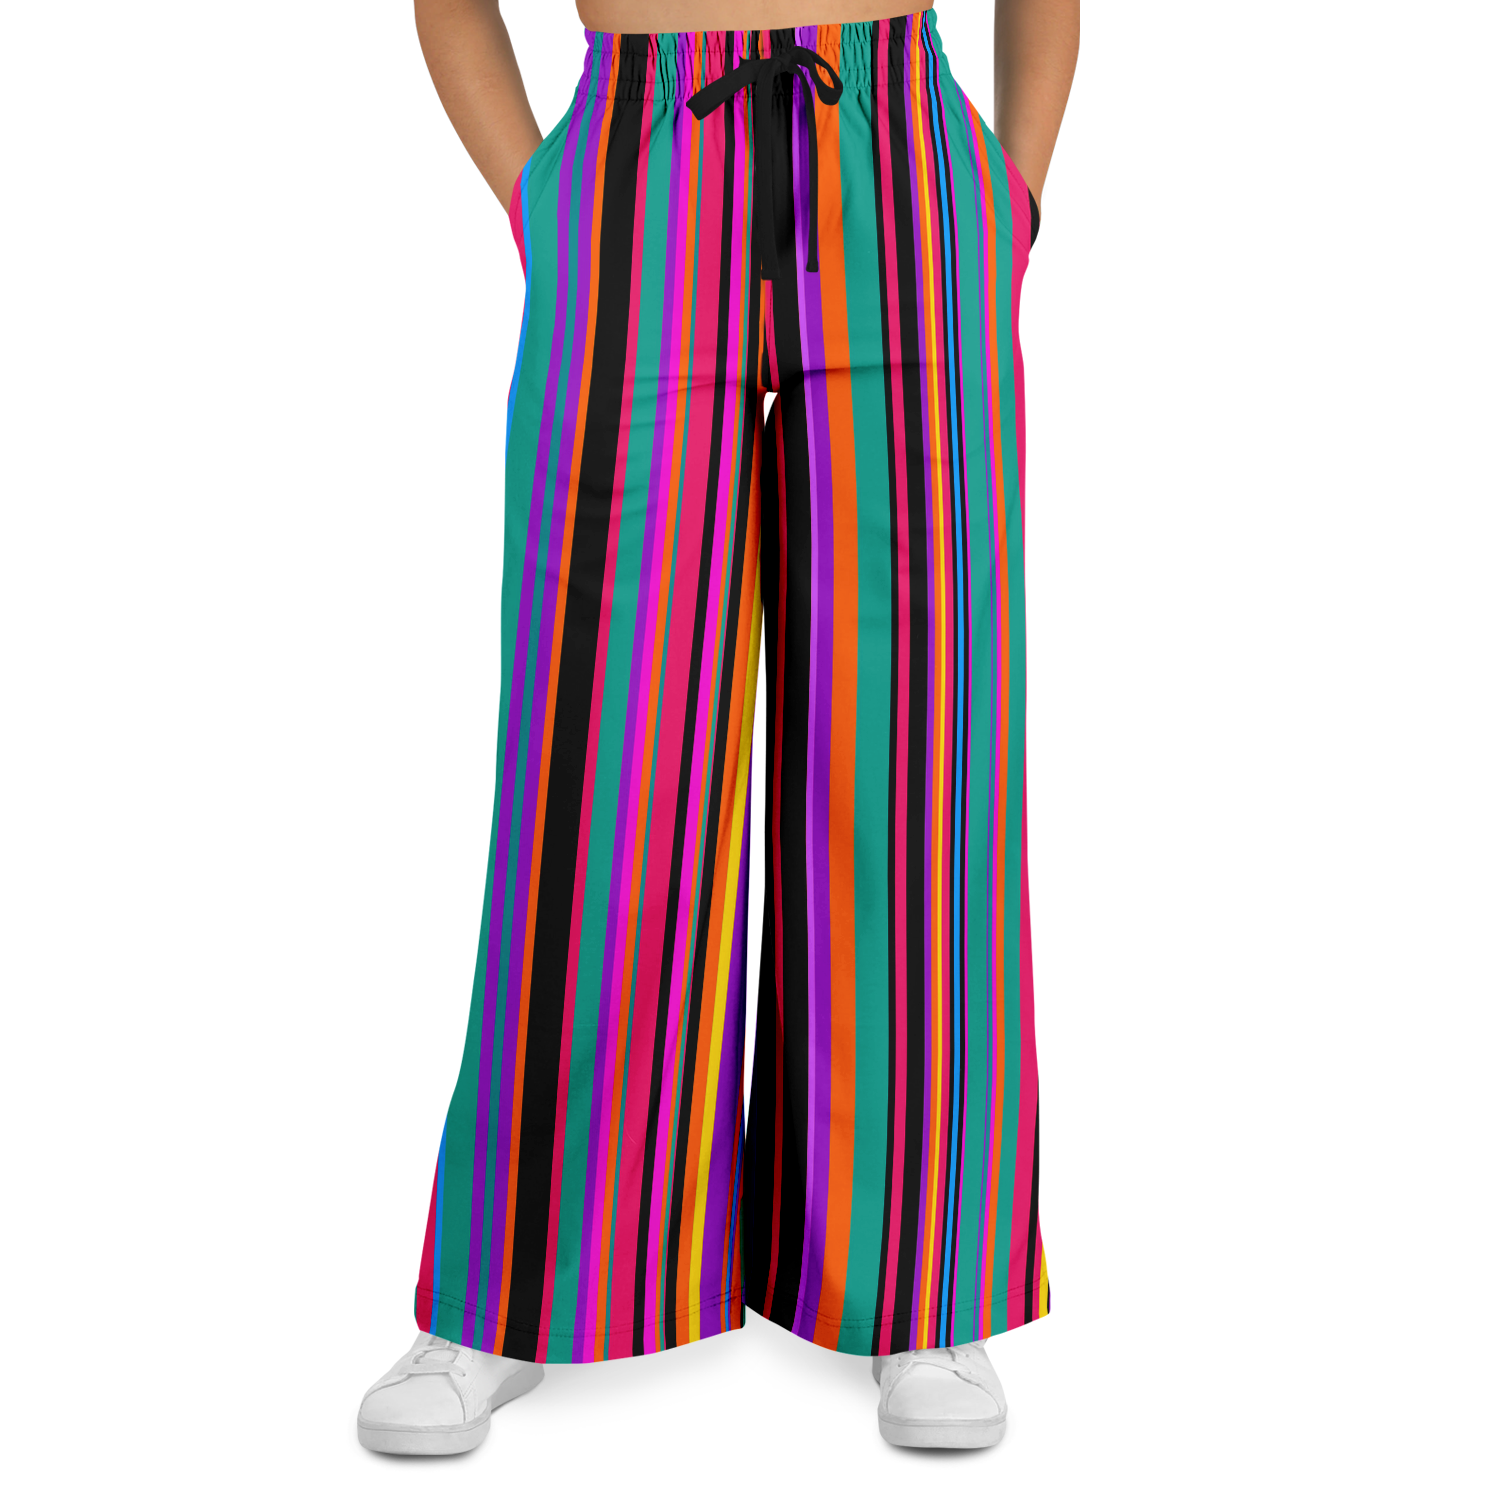 colorful stripped  flares - balloon artists pants - balloon dog apparel